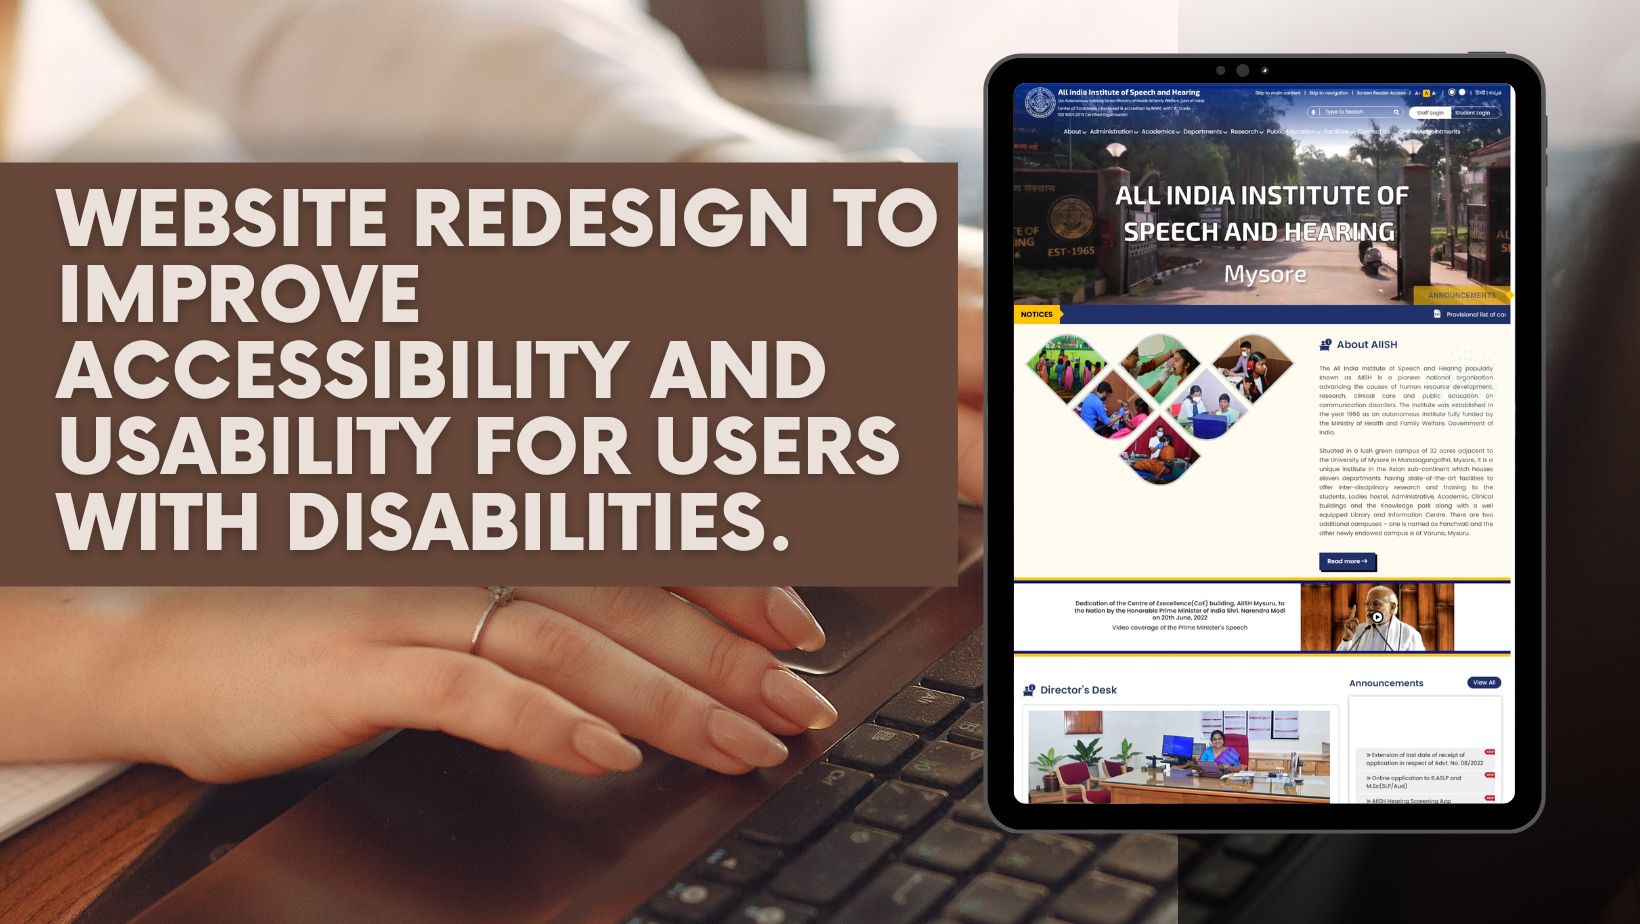 Website redesign to improve accessibility and usability for users with disabilities.